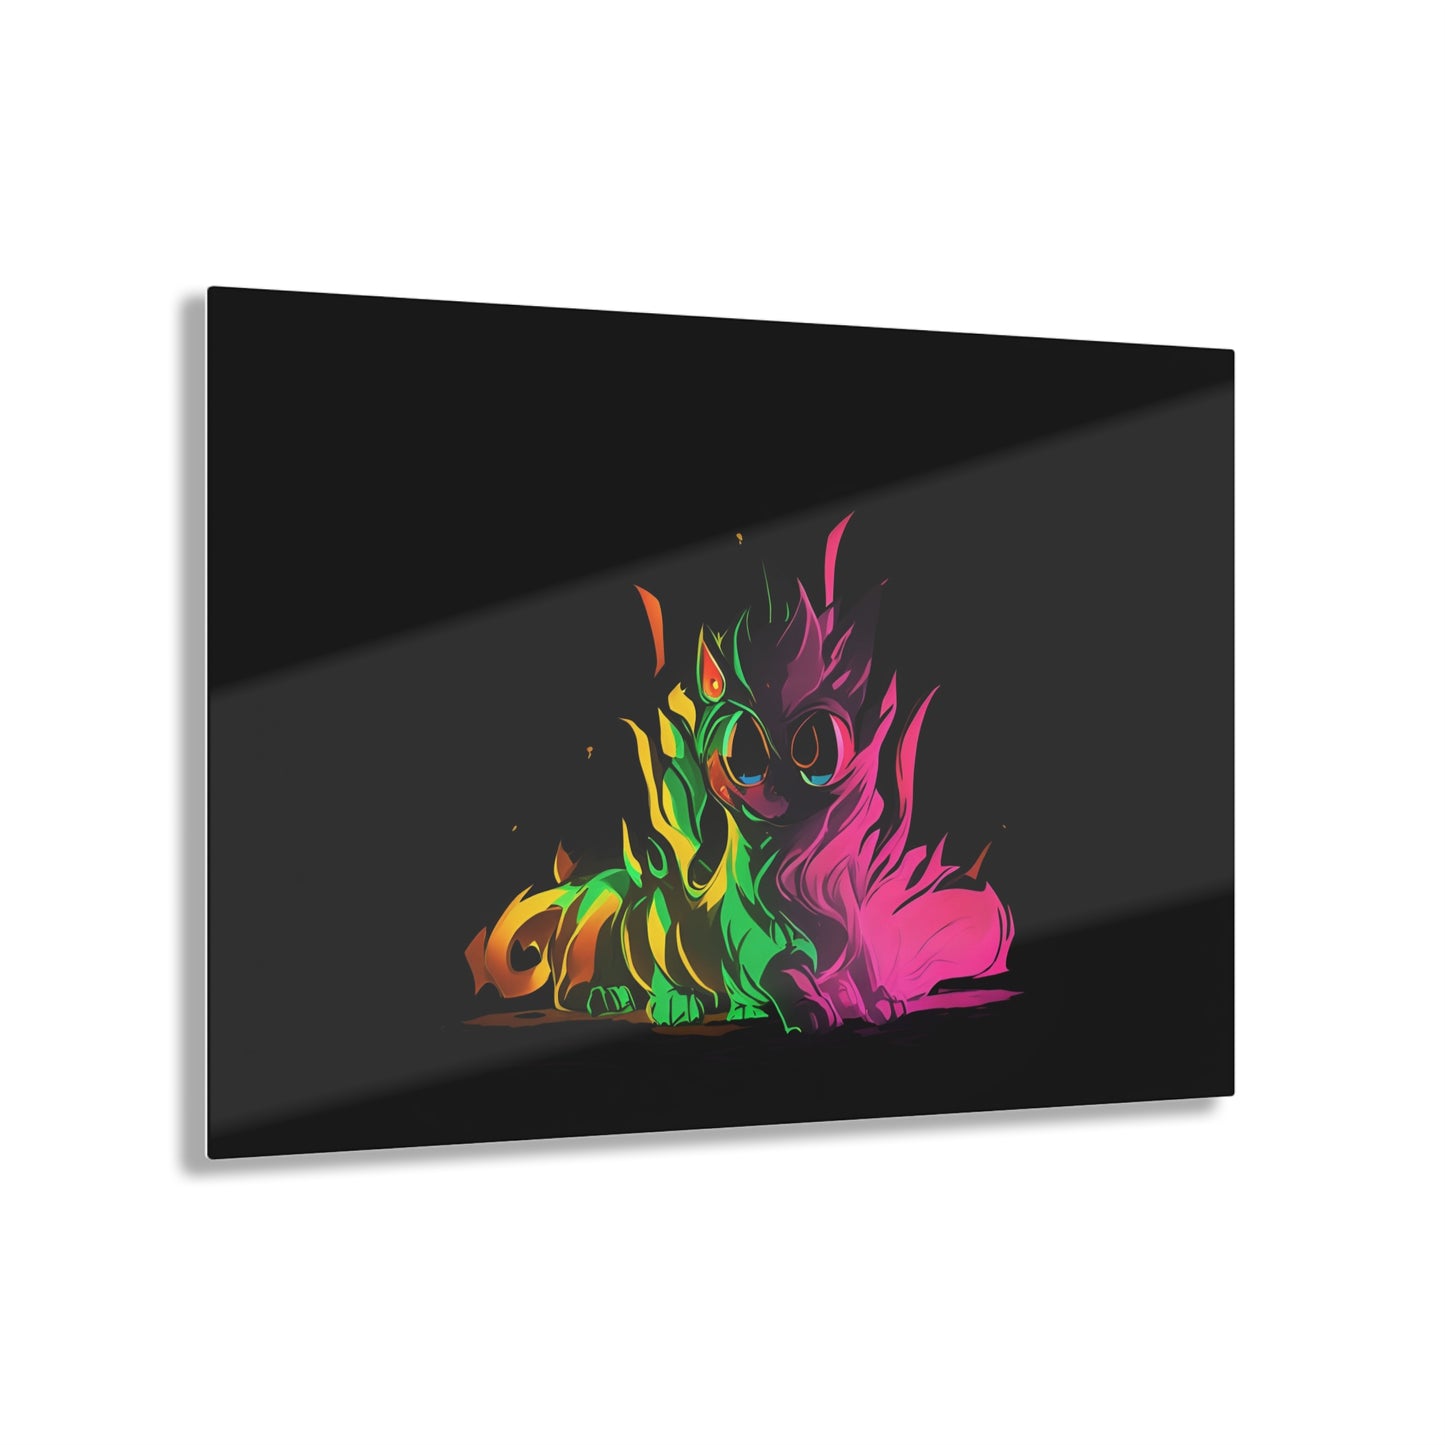 Abstracts Art on Jet Black Acrylic Panels for gameroom art gay gift for lgbtq lovers ally femme style art horizontal orientaion v6